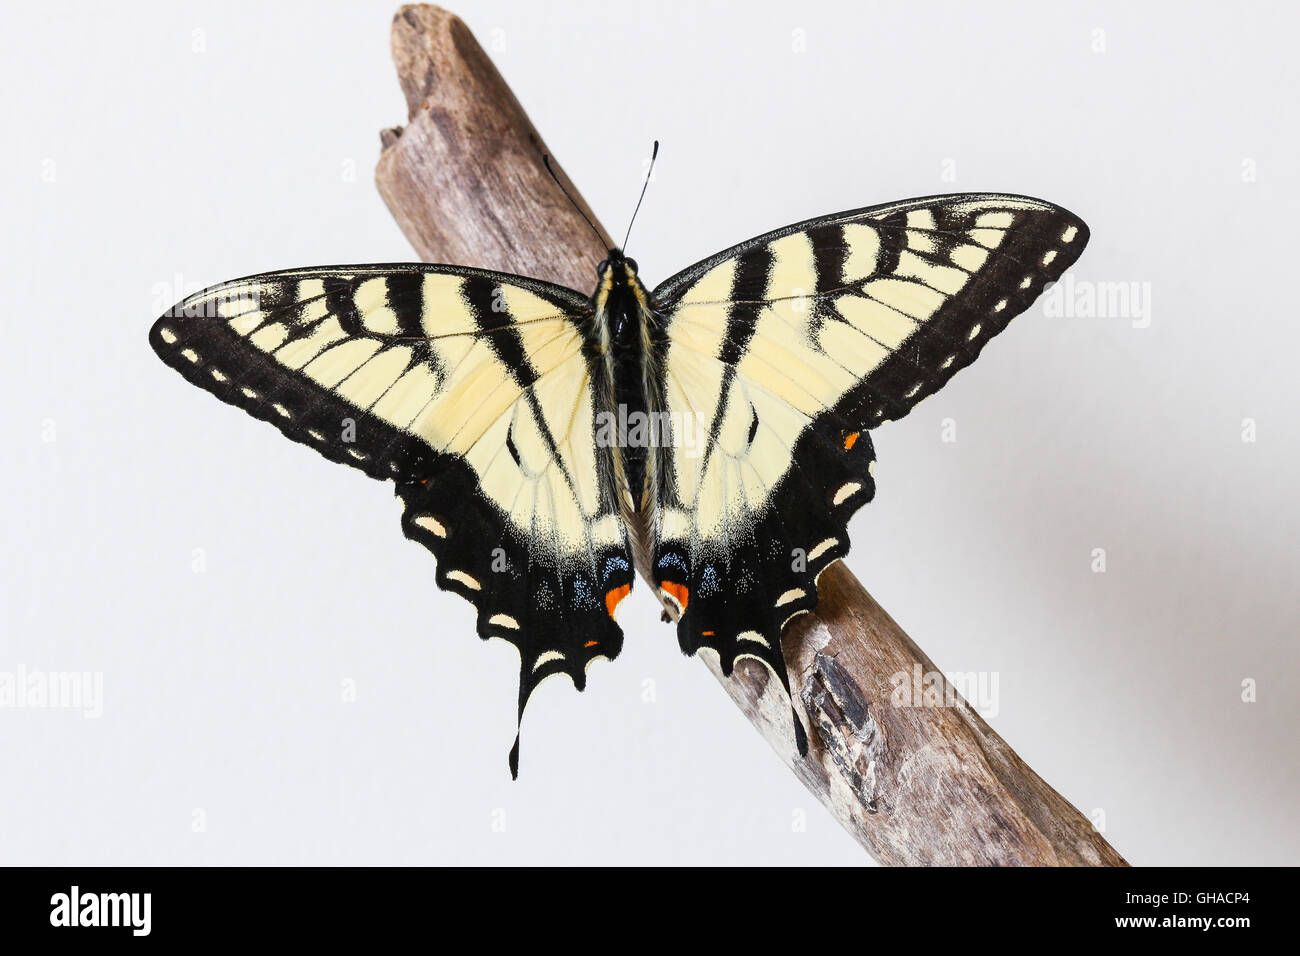 A freshly emerged male Eastern Tiger Swallowtail butterfly (Papilio glaucus) resting on a piece of driftwood, Indiana, USA Stock Photo